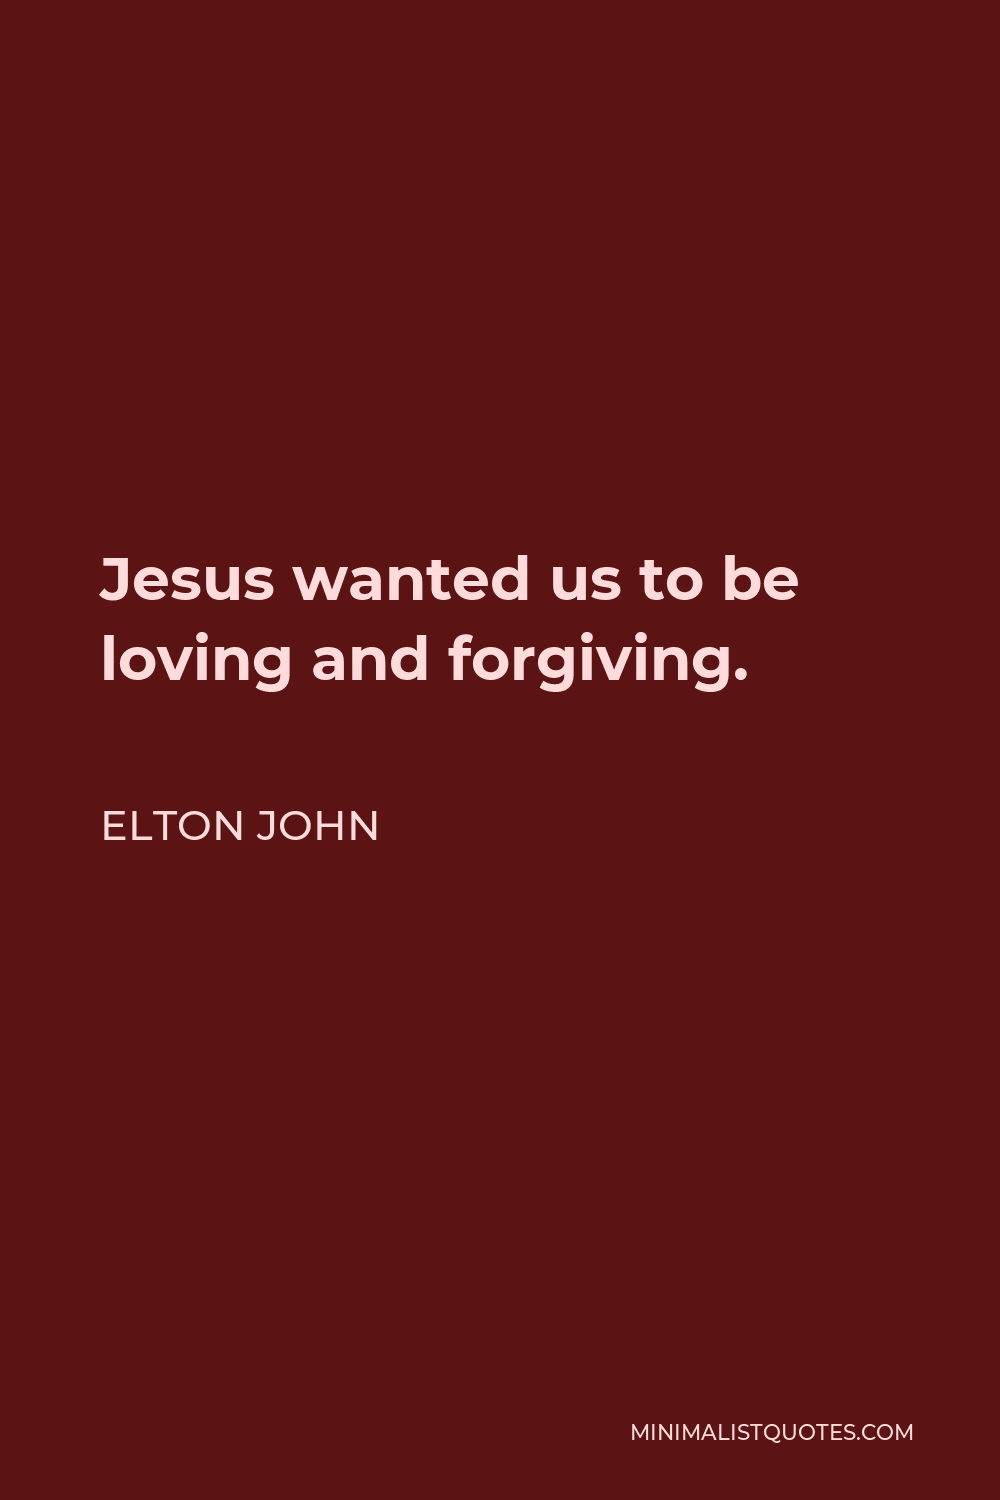 Elton John Quote - Jesus wanted us to be loving and forgiving.